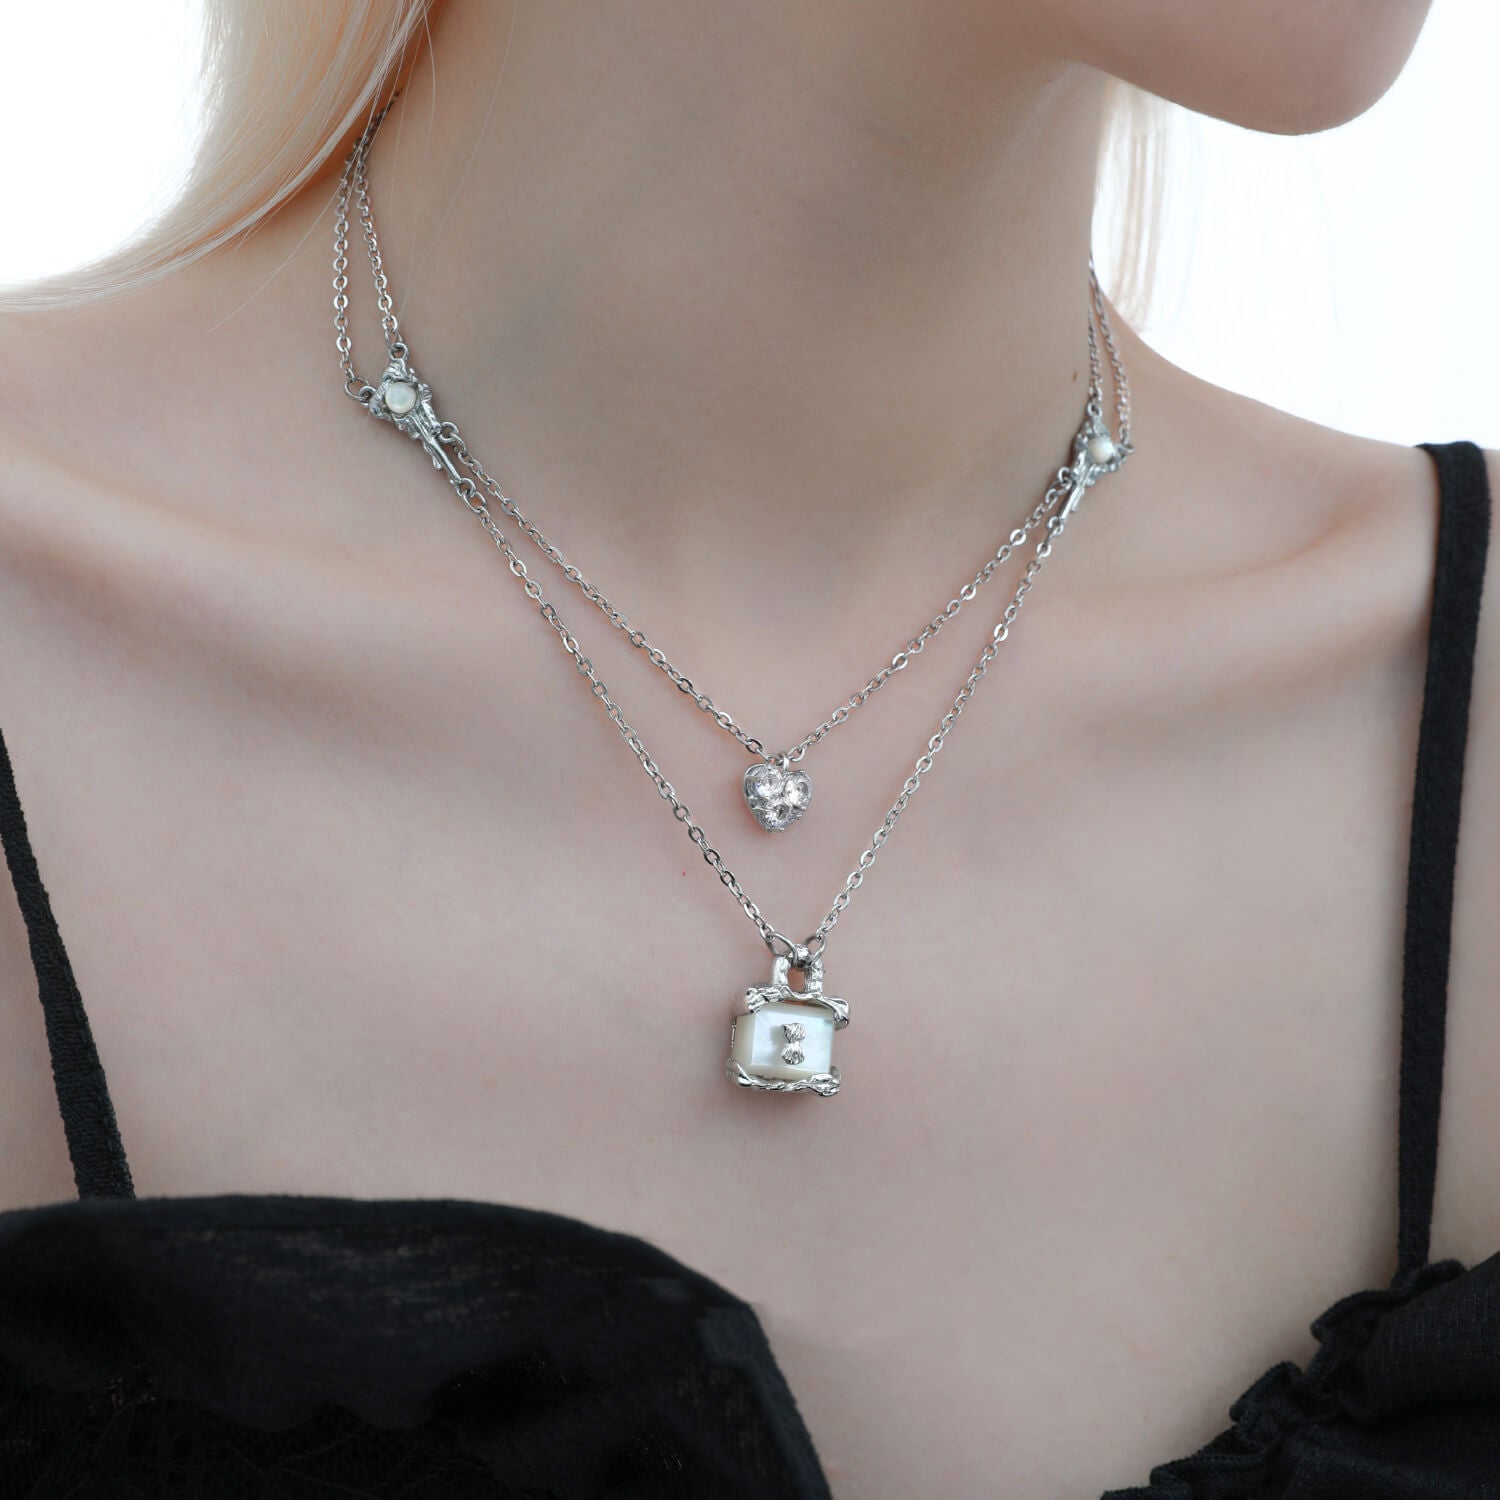 Express eternal love with this unique necklace featuring a heart pendant adorned with transparent zircons and a luminous pearl lock.